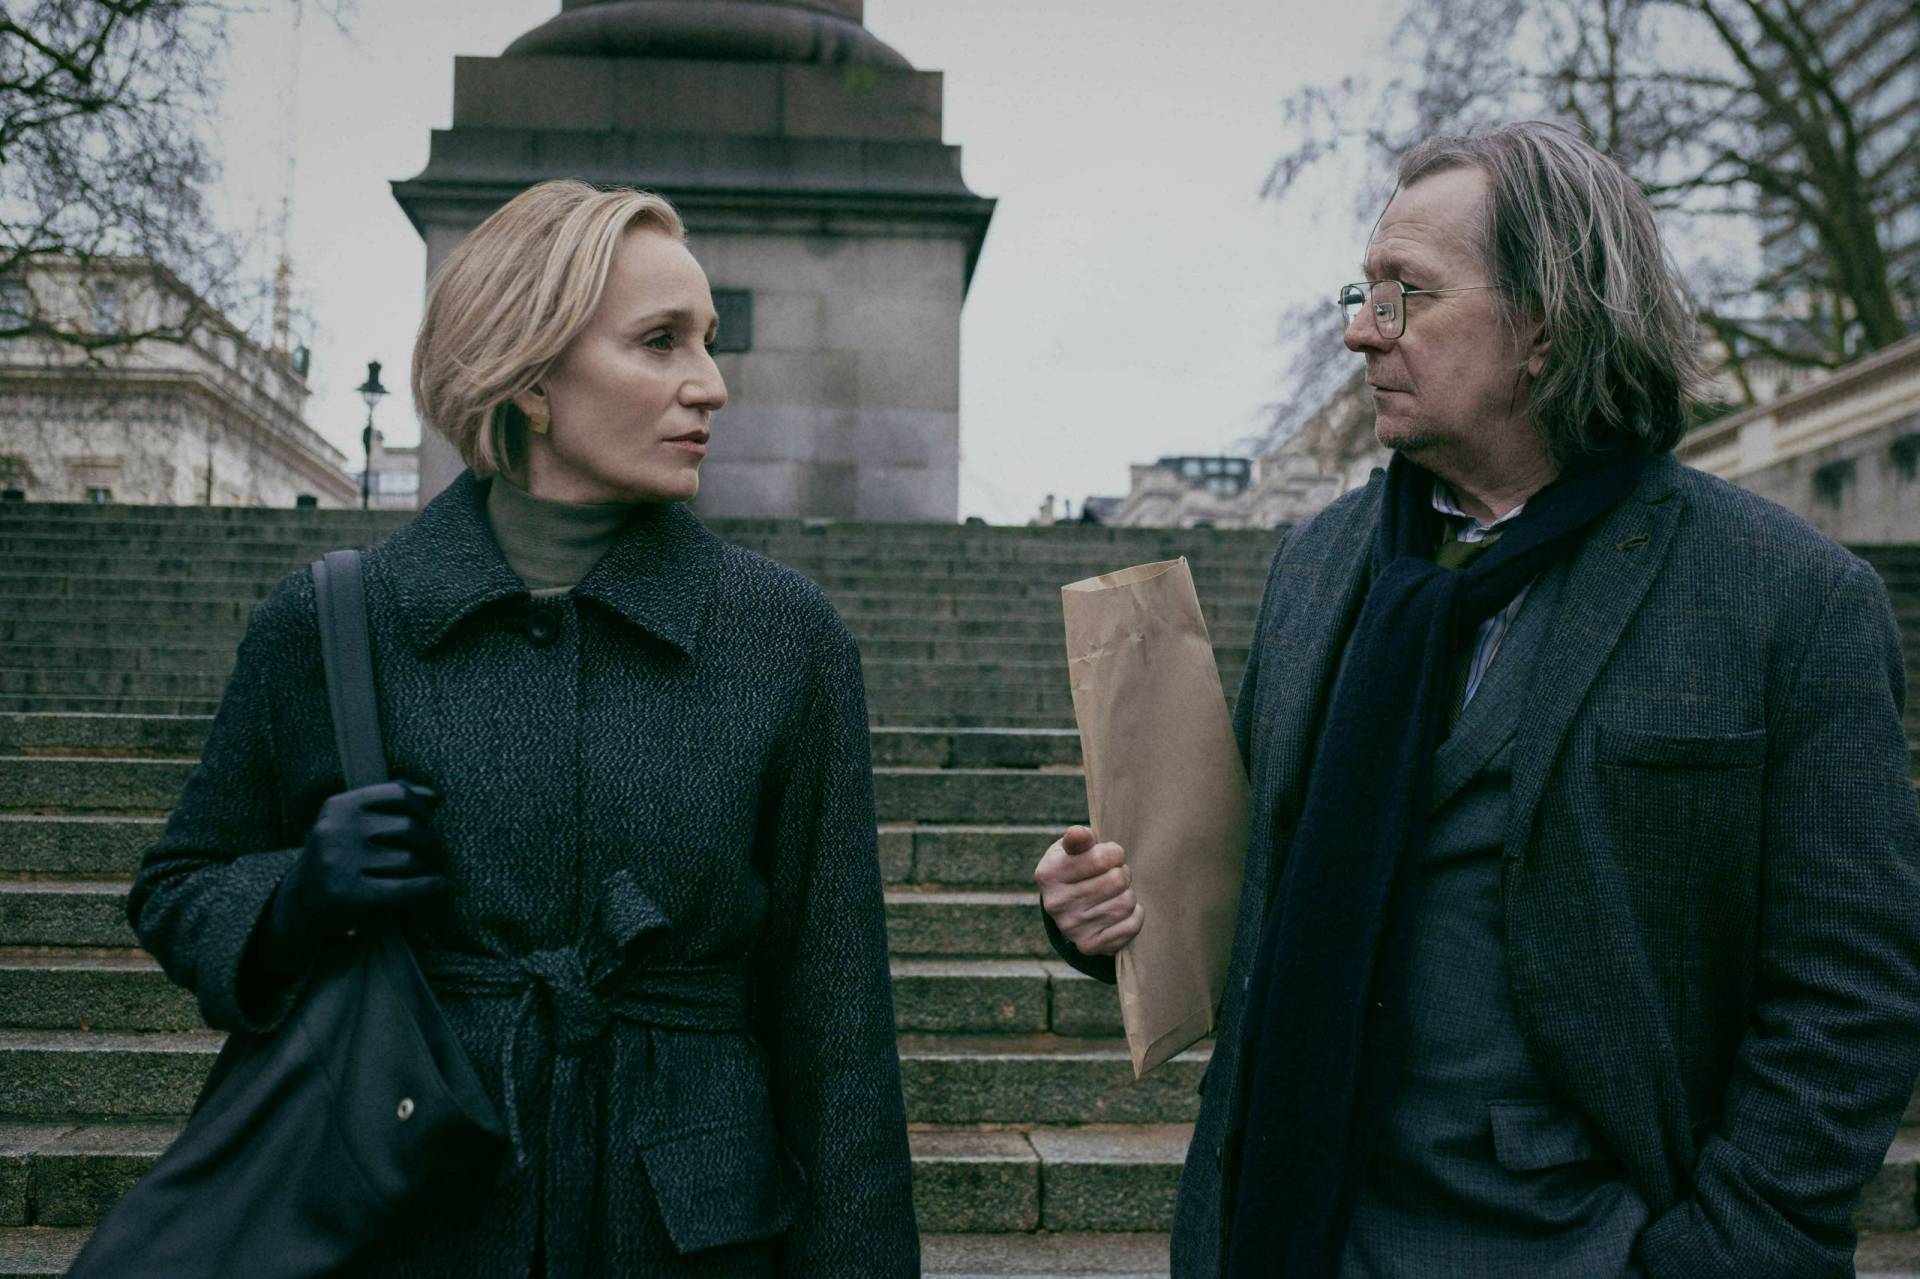 A slender white woman with a blonde bob stands at the bottom of a set of stone stairs. She is looking at an unkempt white man with long hair who is holding a brown envelope. The park they are standing in looks cold.